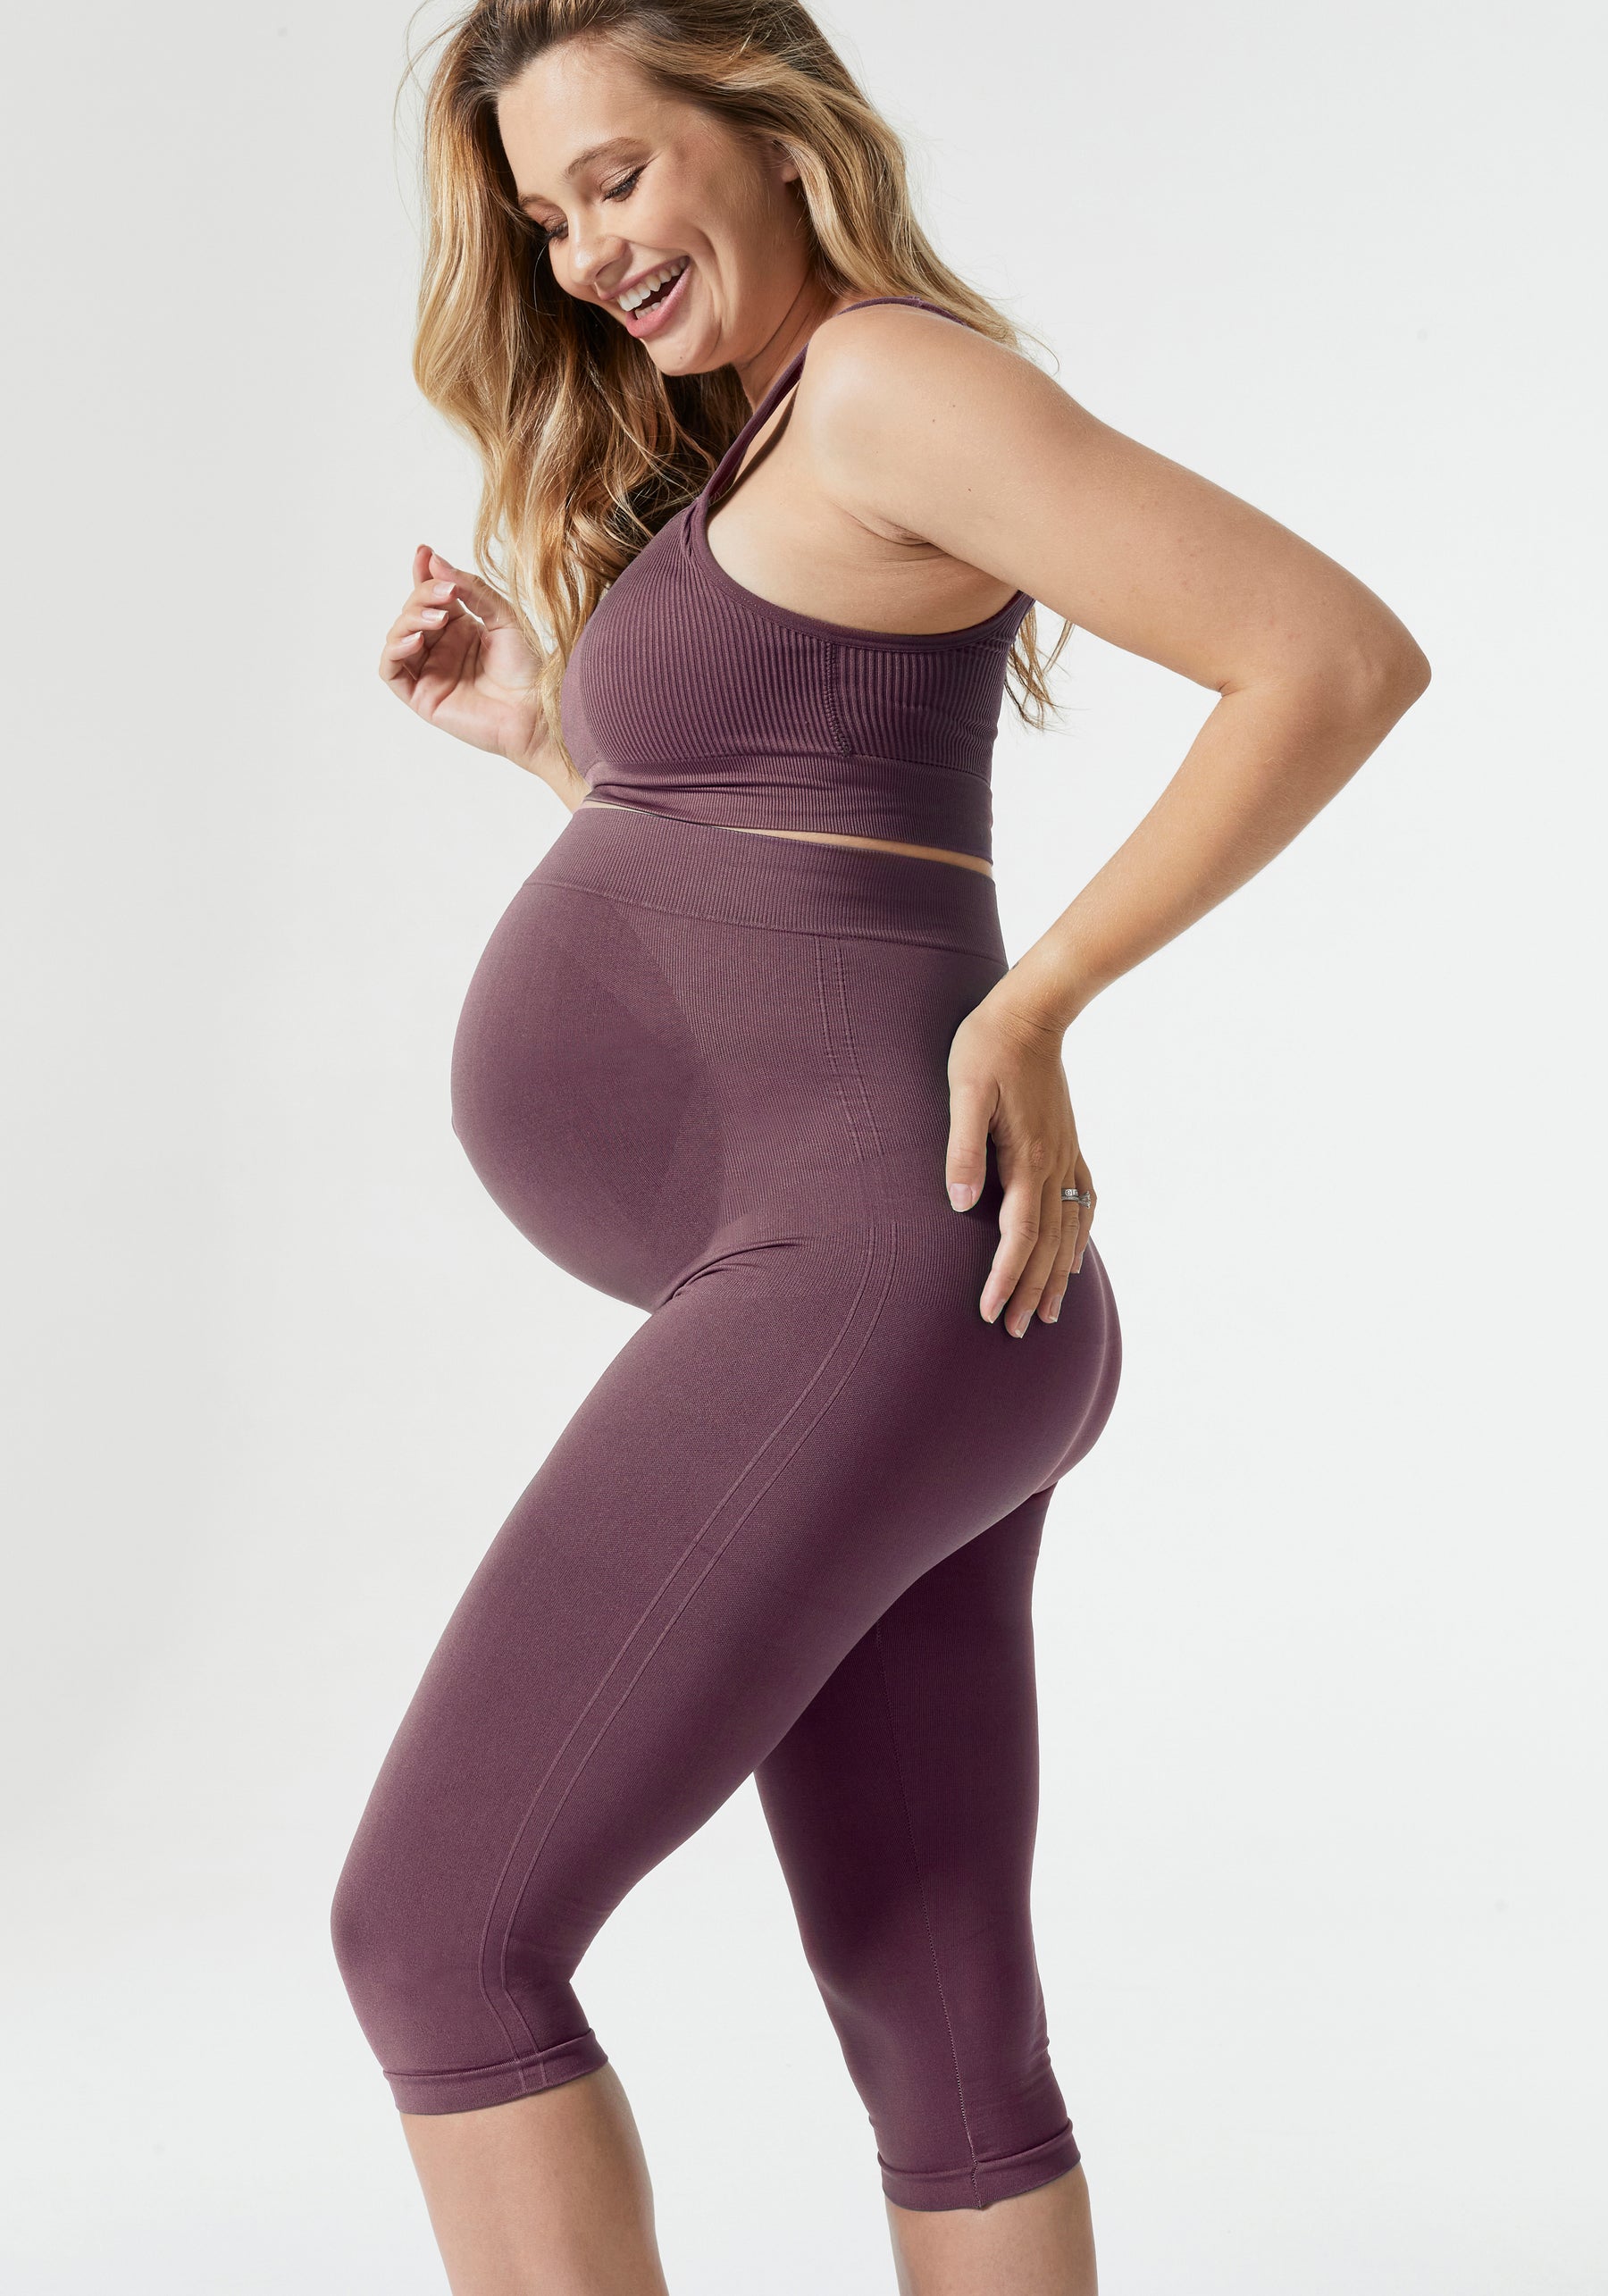 NWT $74 BLANQI [ XL ] Everyday Maternity Belly Support Leggings